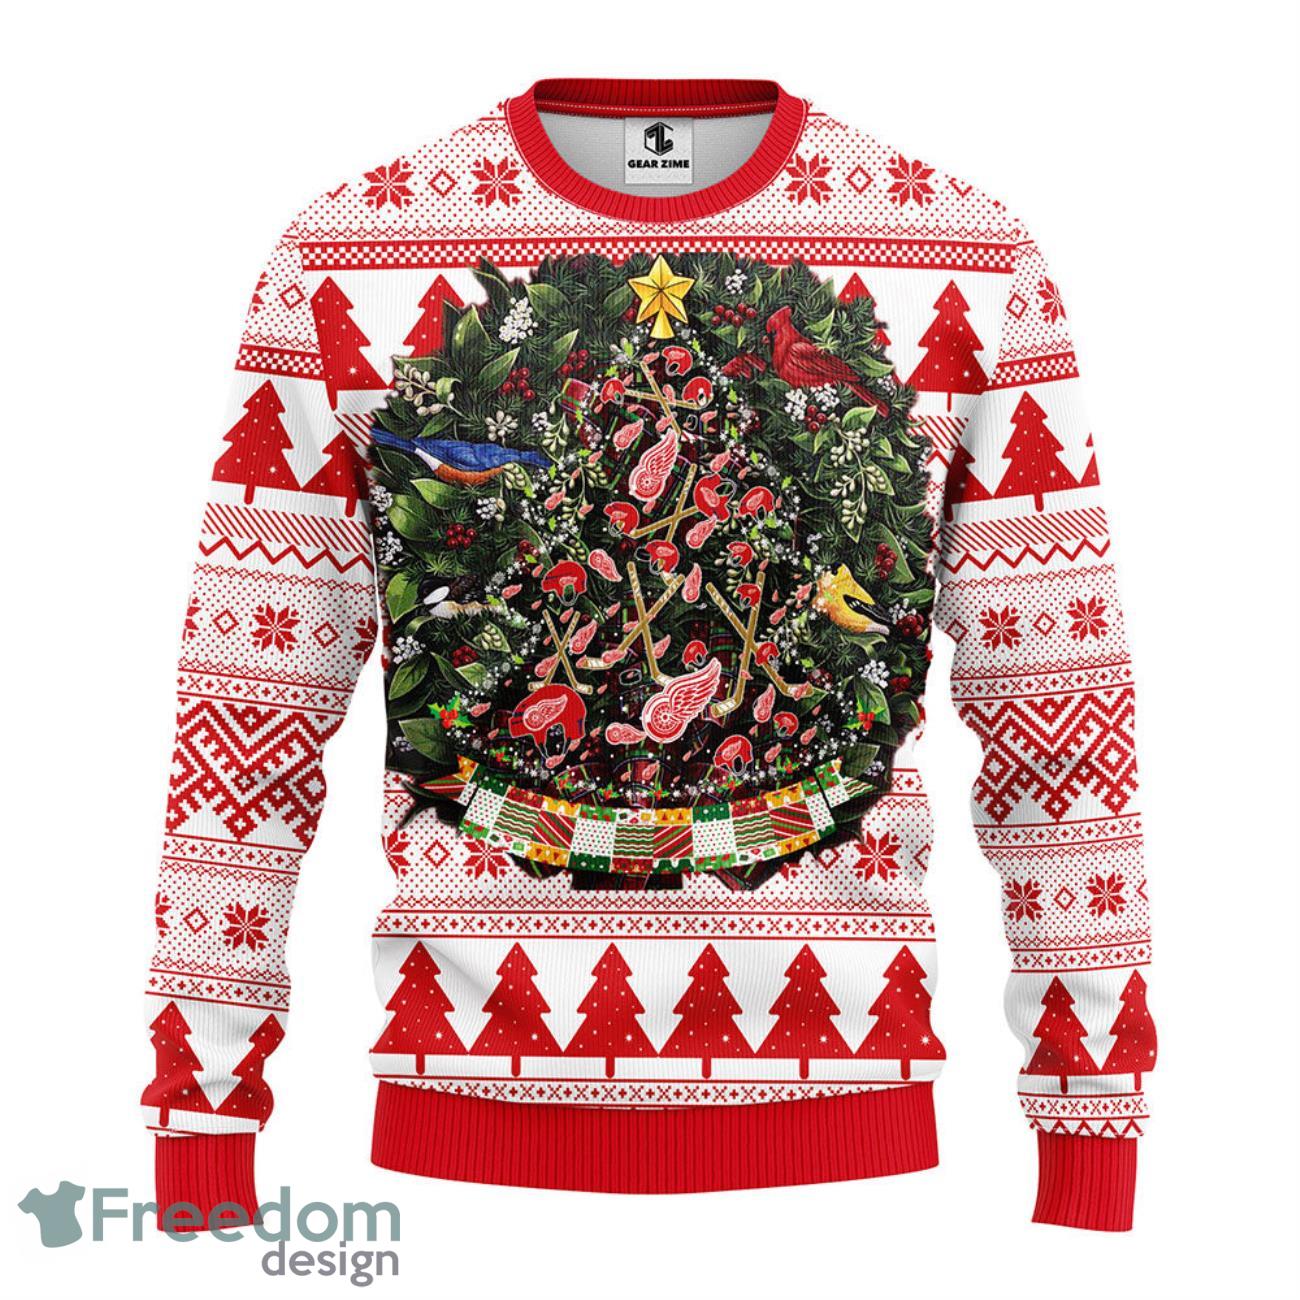 Detroit Red Wing Grateful Dead Ugly Sweater - T-shirts Low Price